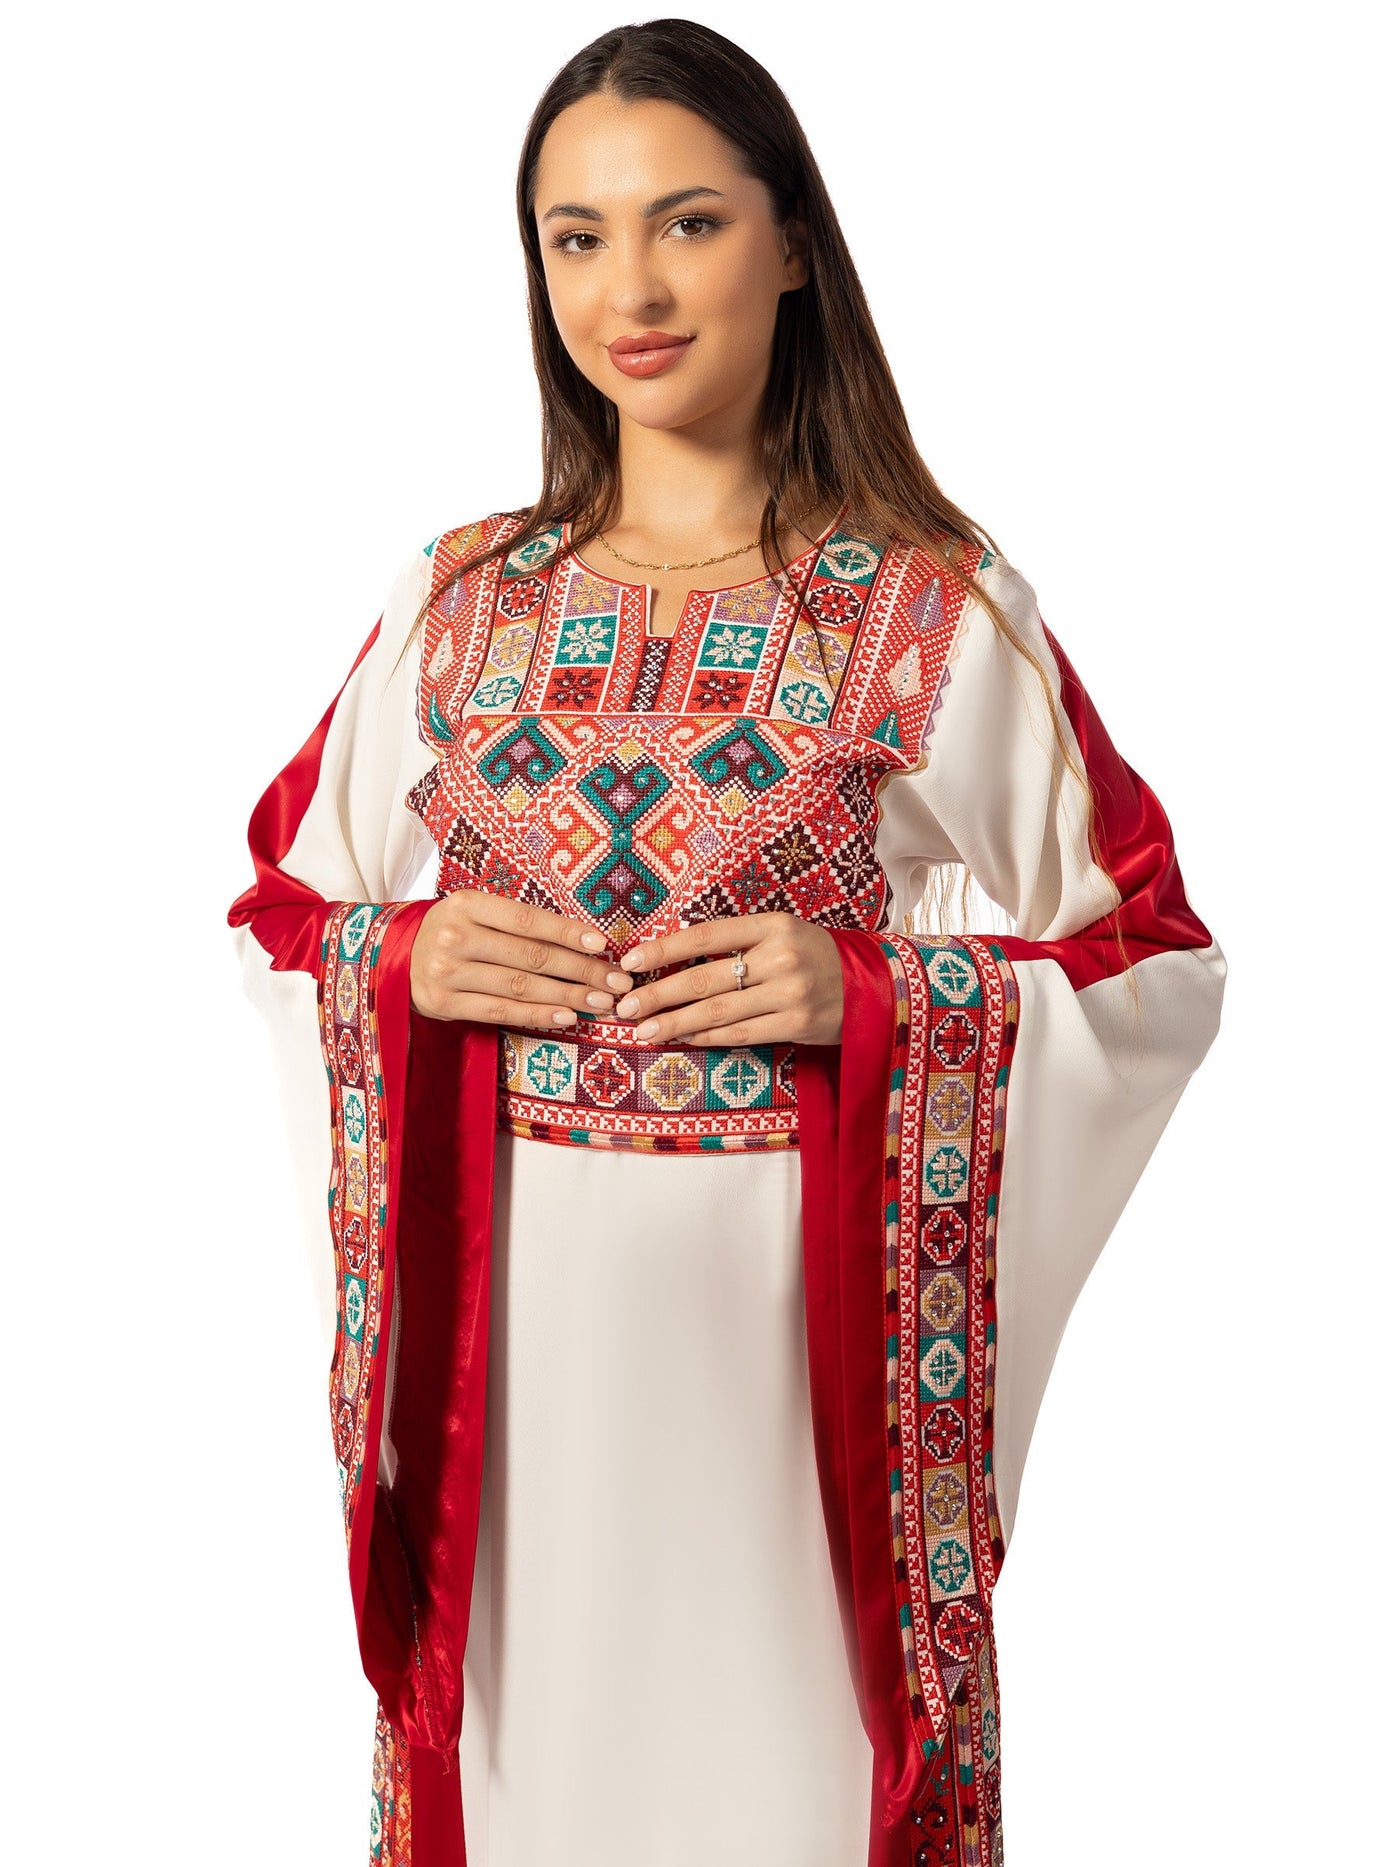 Star of Tulkarem - Very High Quality Embroidered Palestinian style Thobe